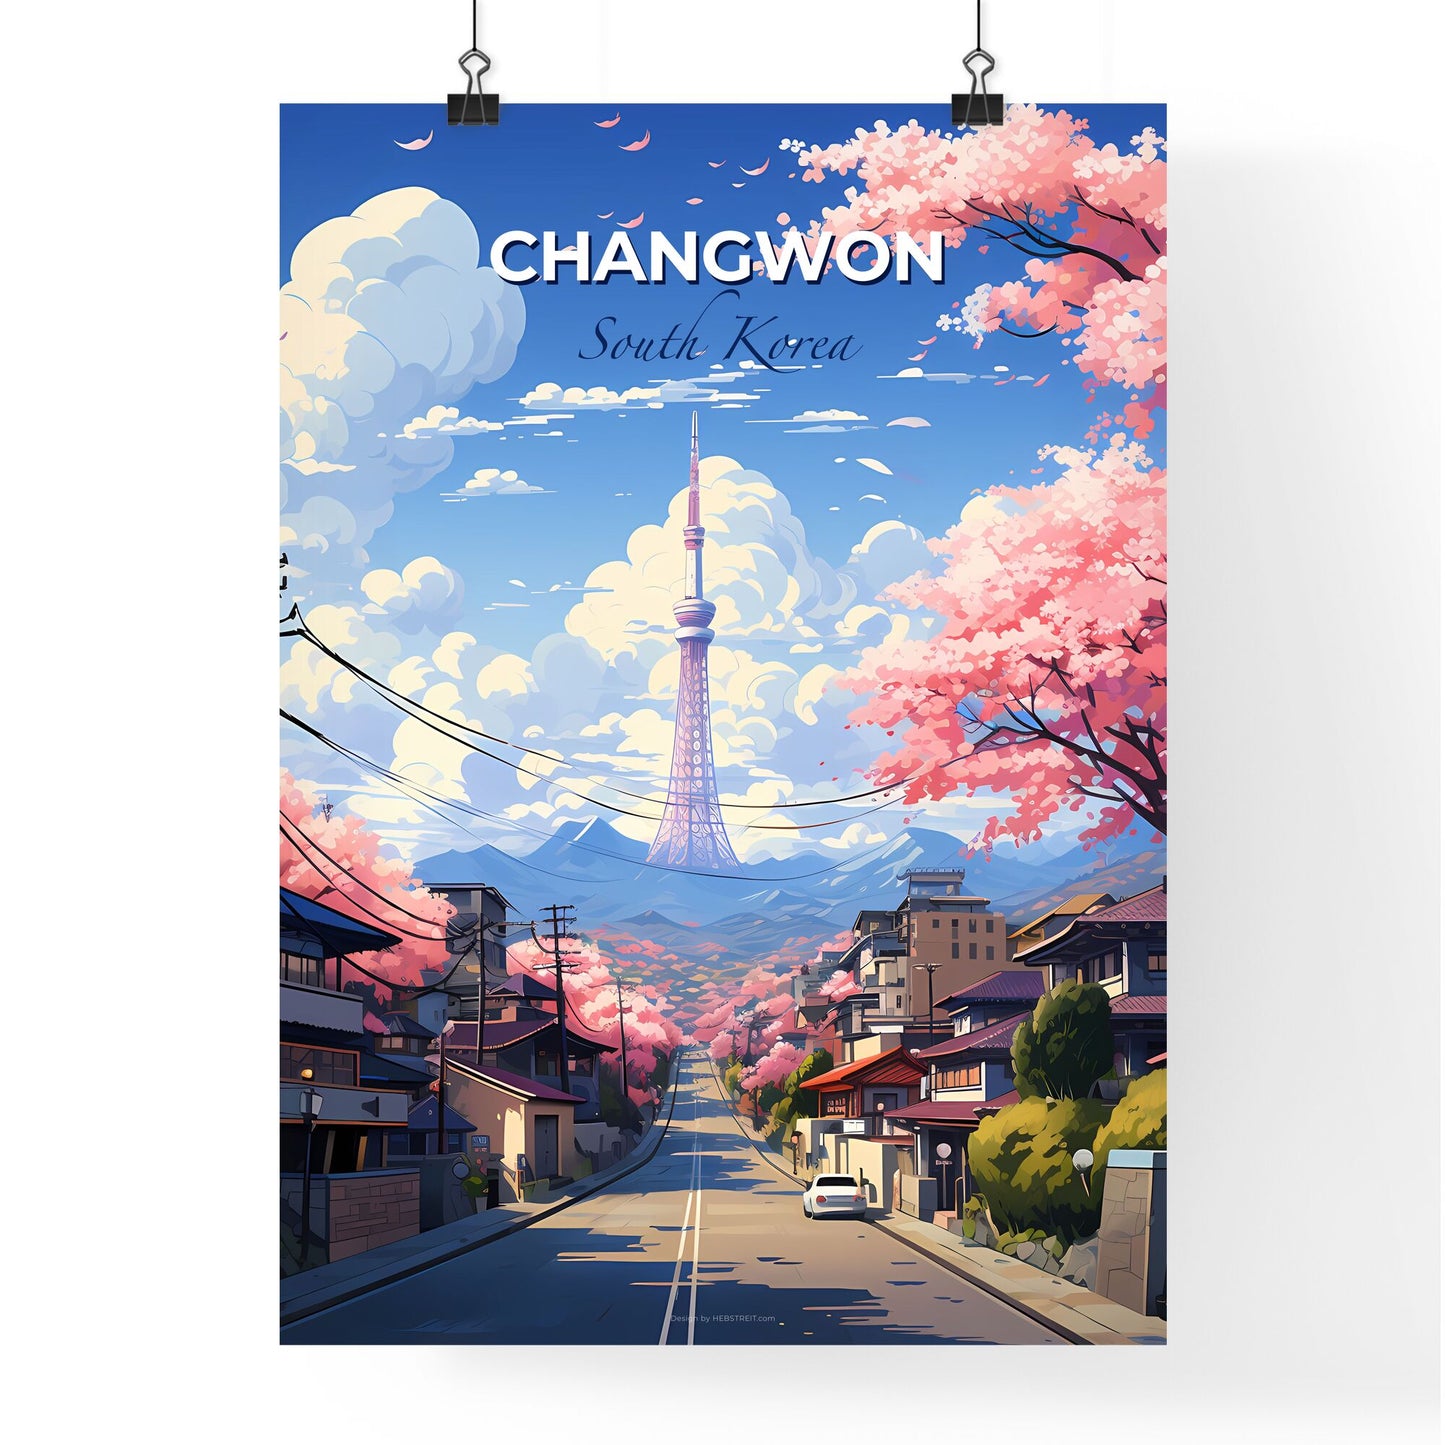 Changwon South Korea City Skyline Vibrant Painting with Cherry Blossoms and Tower Default Title